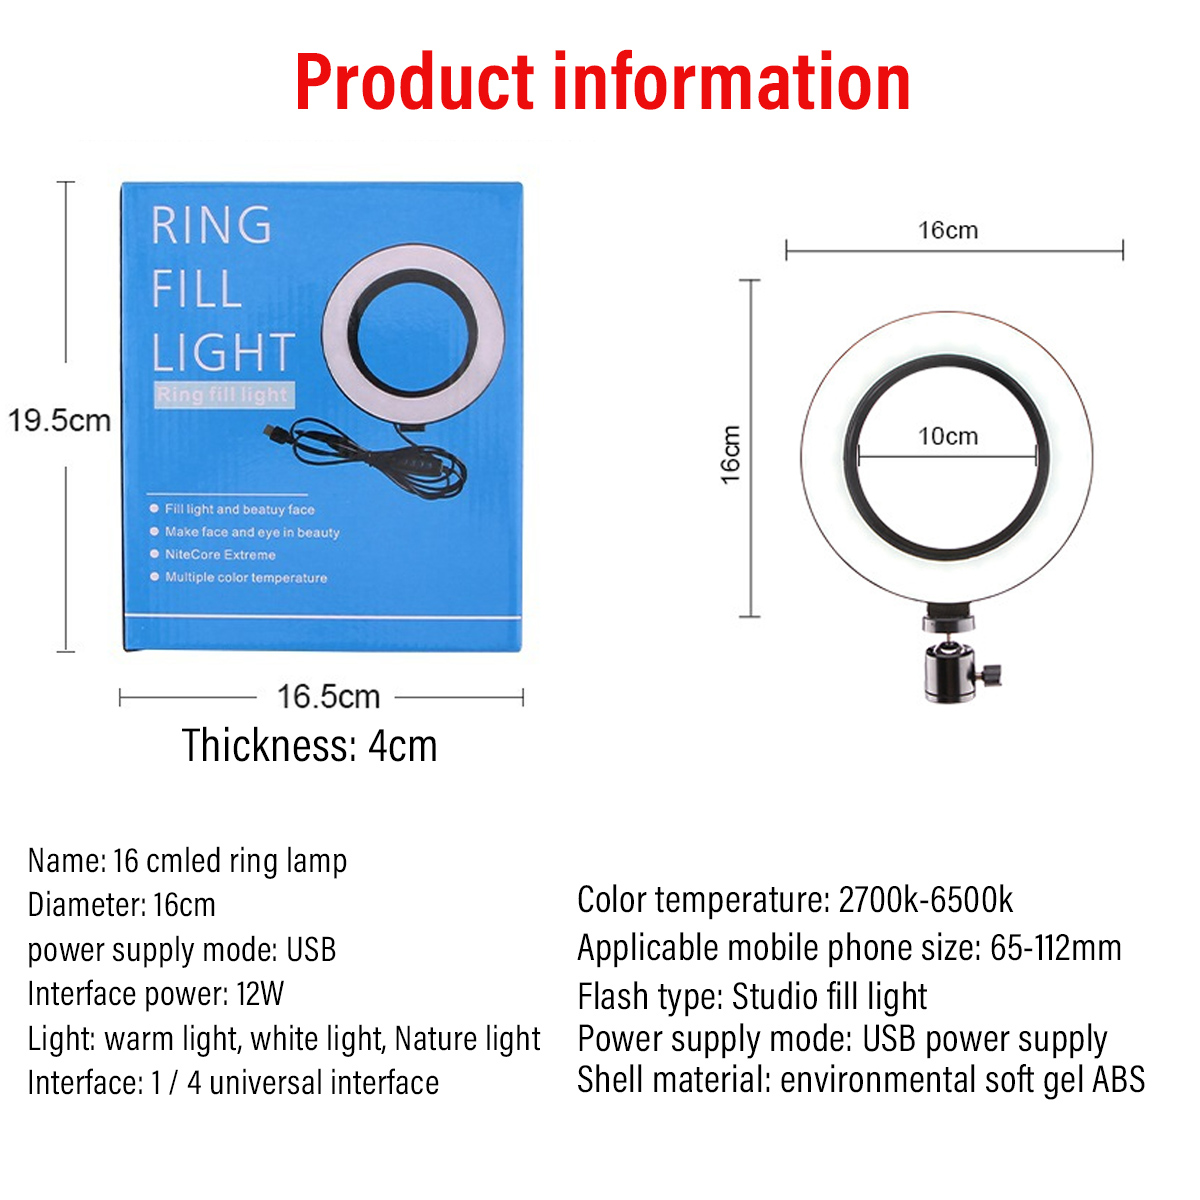 16cm-LED-Ring-Light-Dimmable-LED-Beauty-Ring-Fill-Light-Photography-for-Selfie-Live-Stream-Broadcast-1701207-11